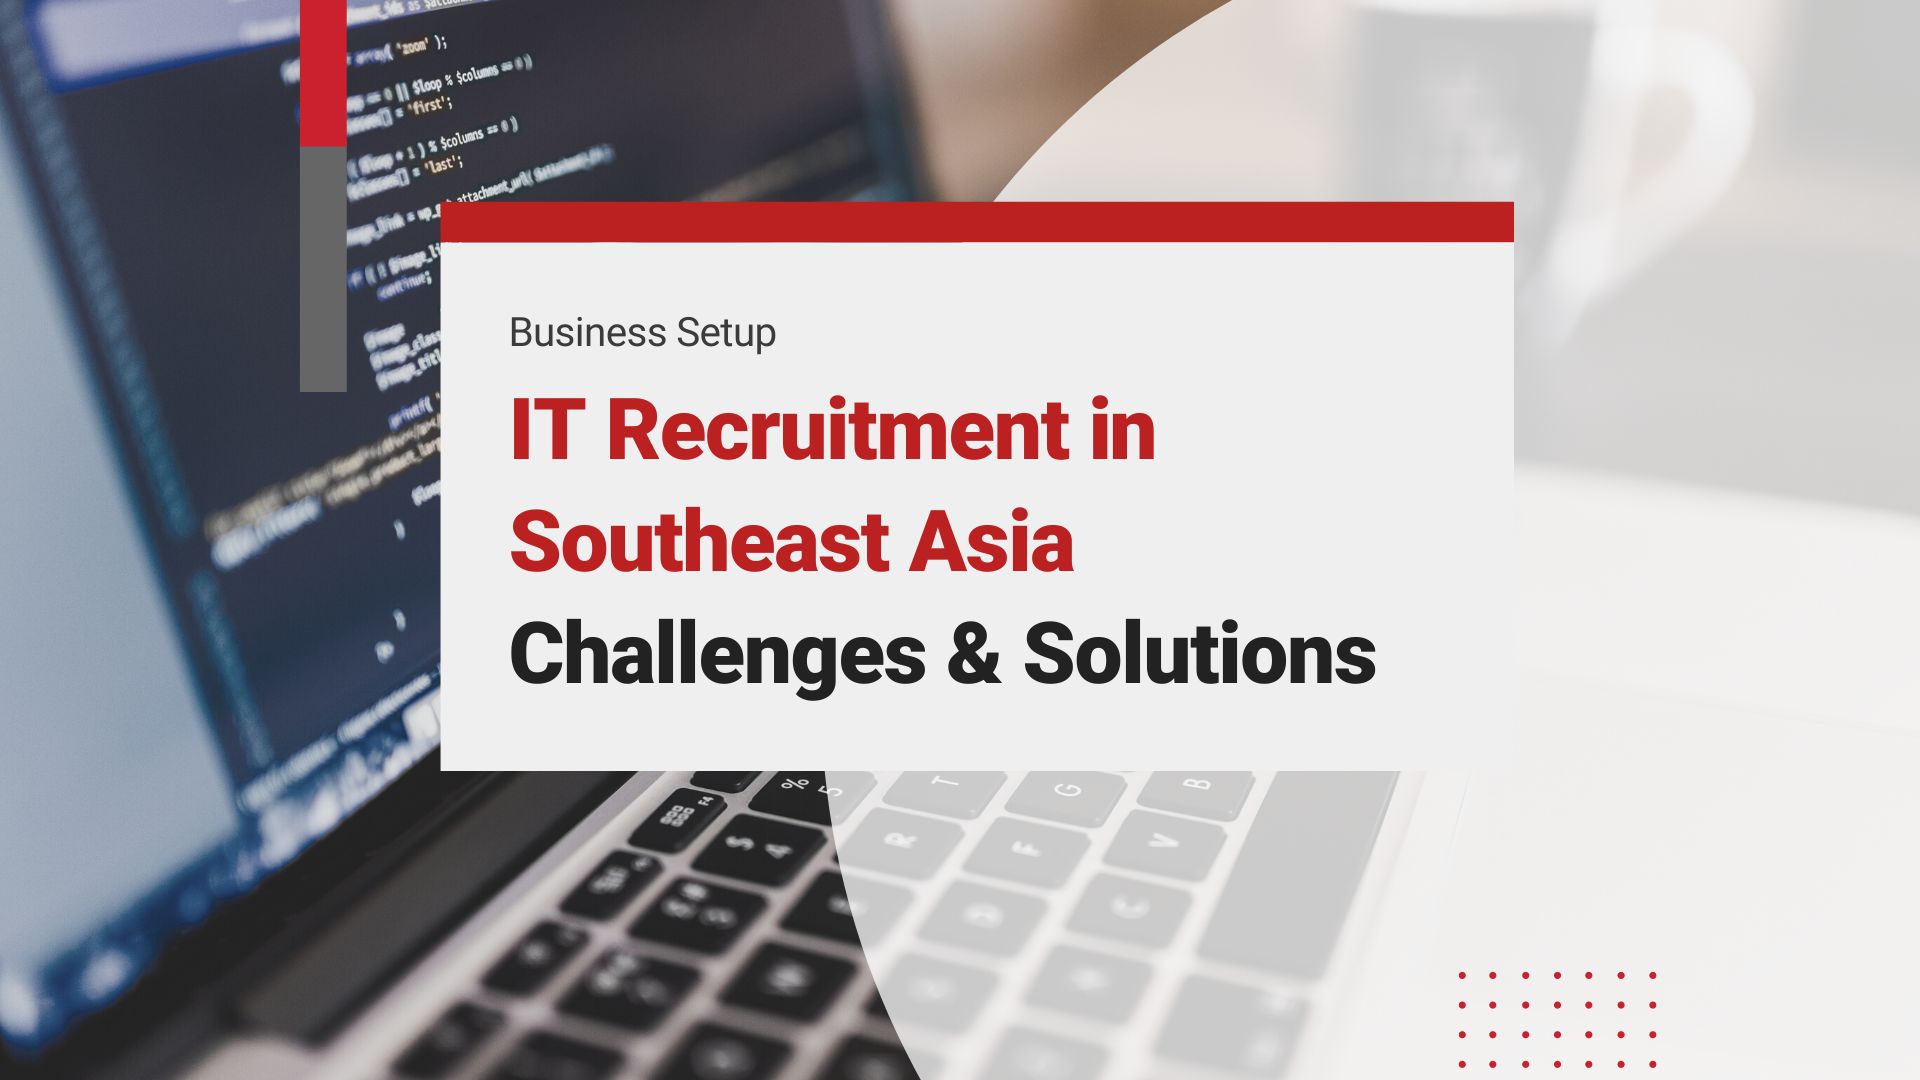 IT Recruitment in Southeast Asia Challenges & Solutions